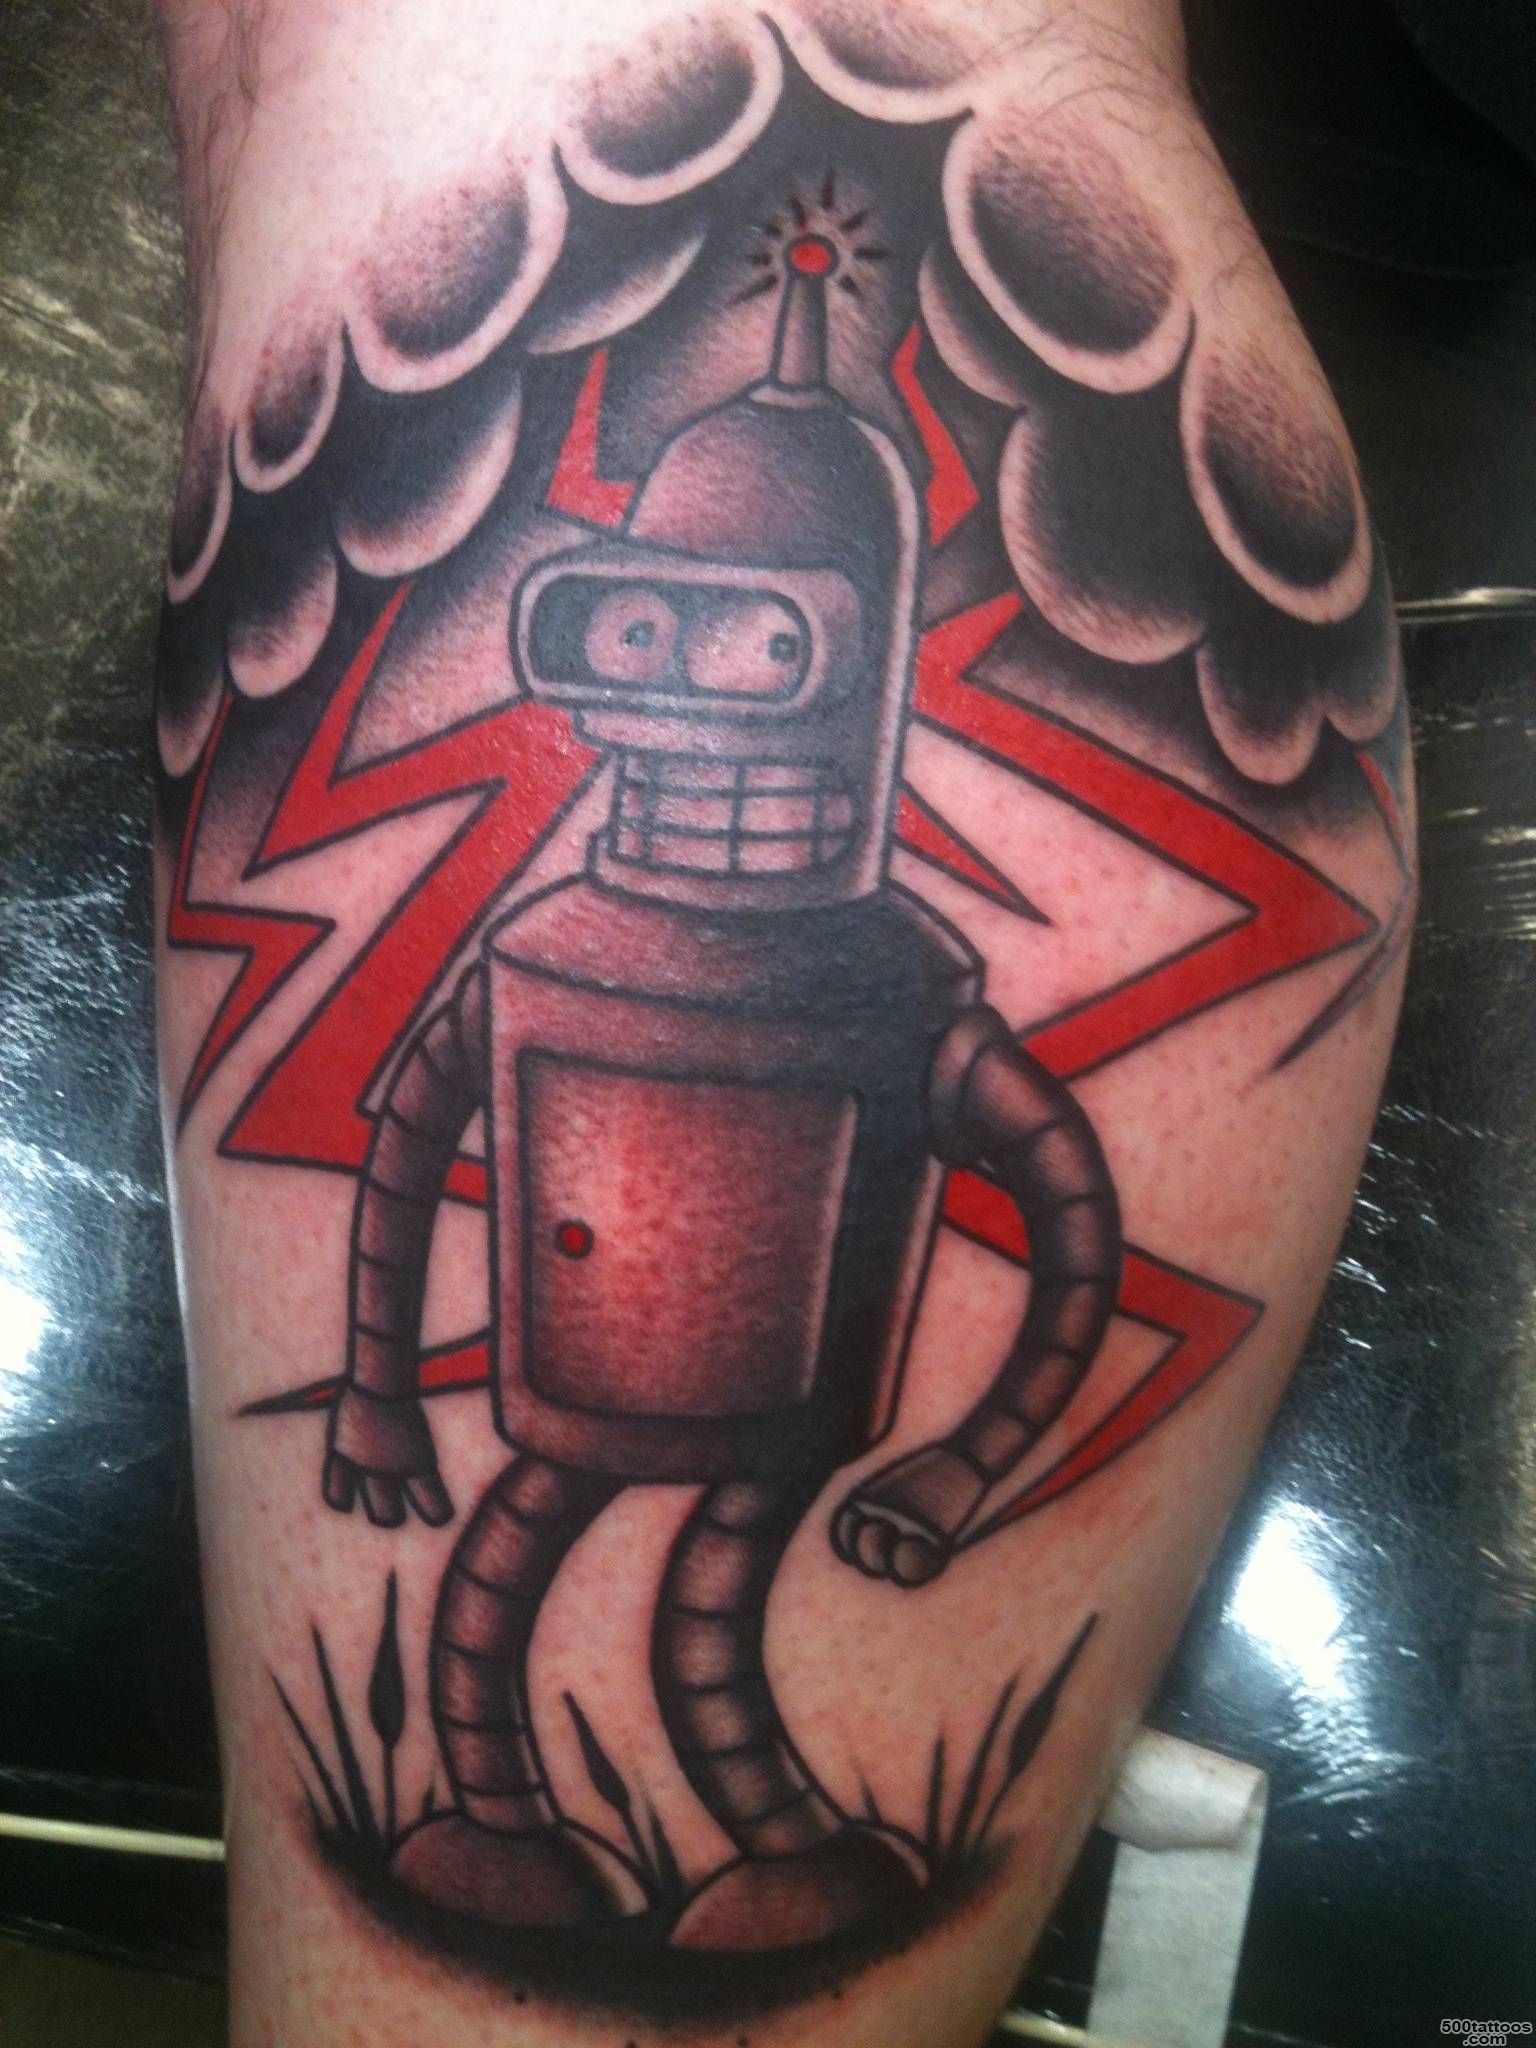 Bender Tattoo i just got today from Ro @ To The Grave Tattoo in ..._17